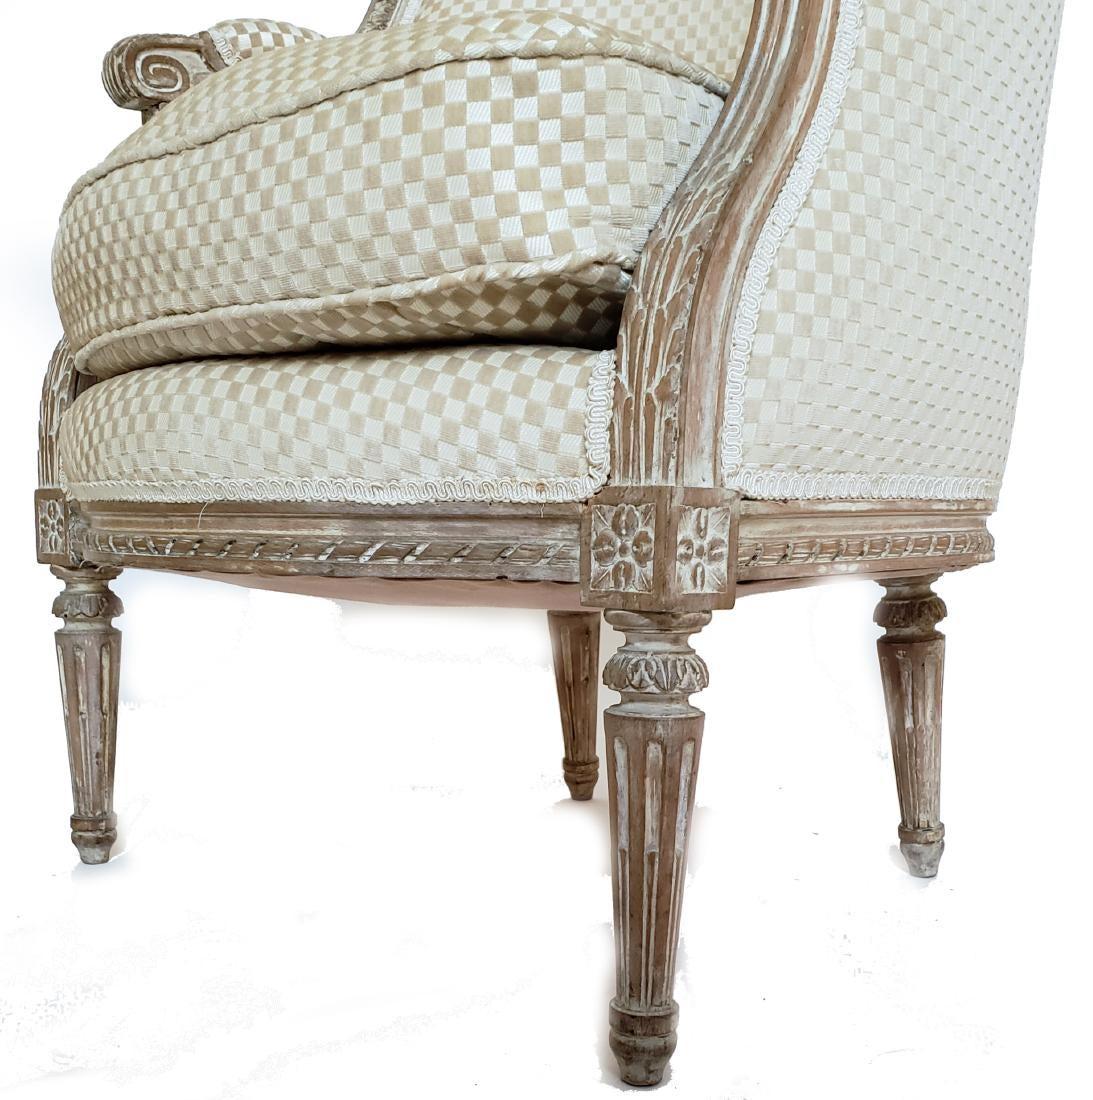 Louis XVI style velvet barrel back chair, with cream checkerboard geometric upholstery and painted frame.